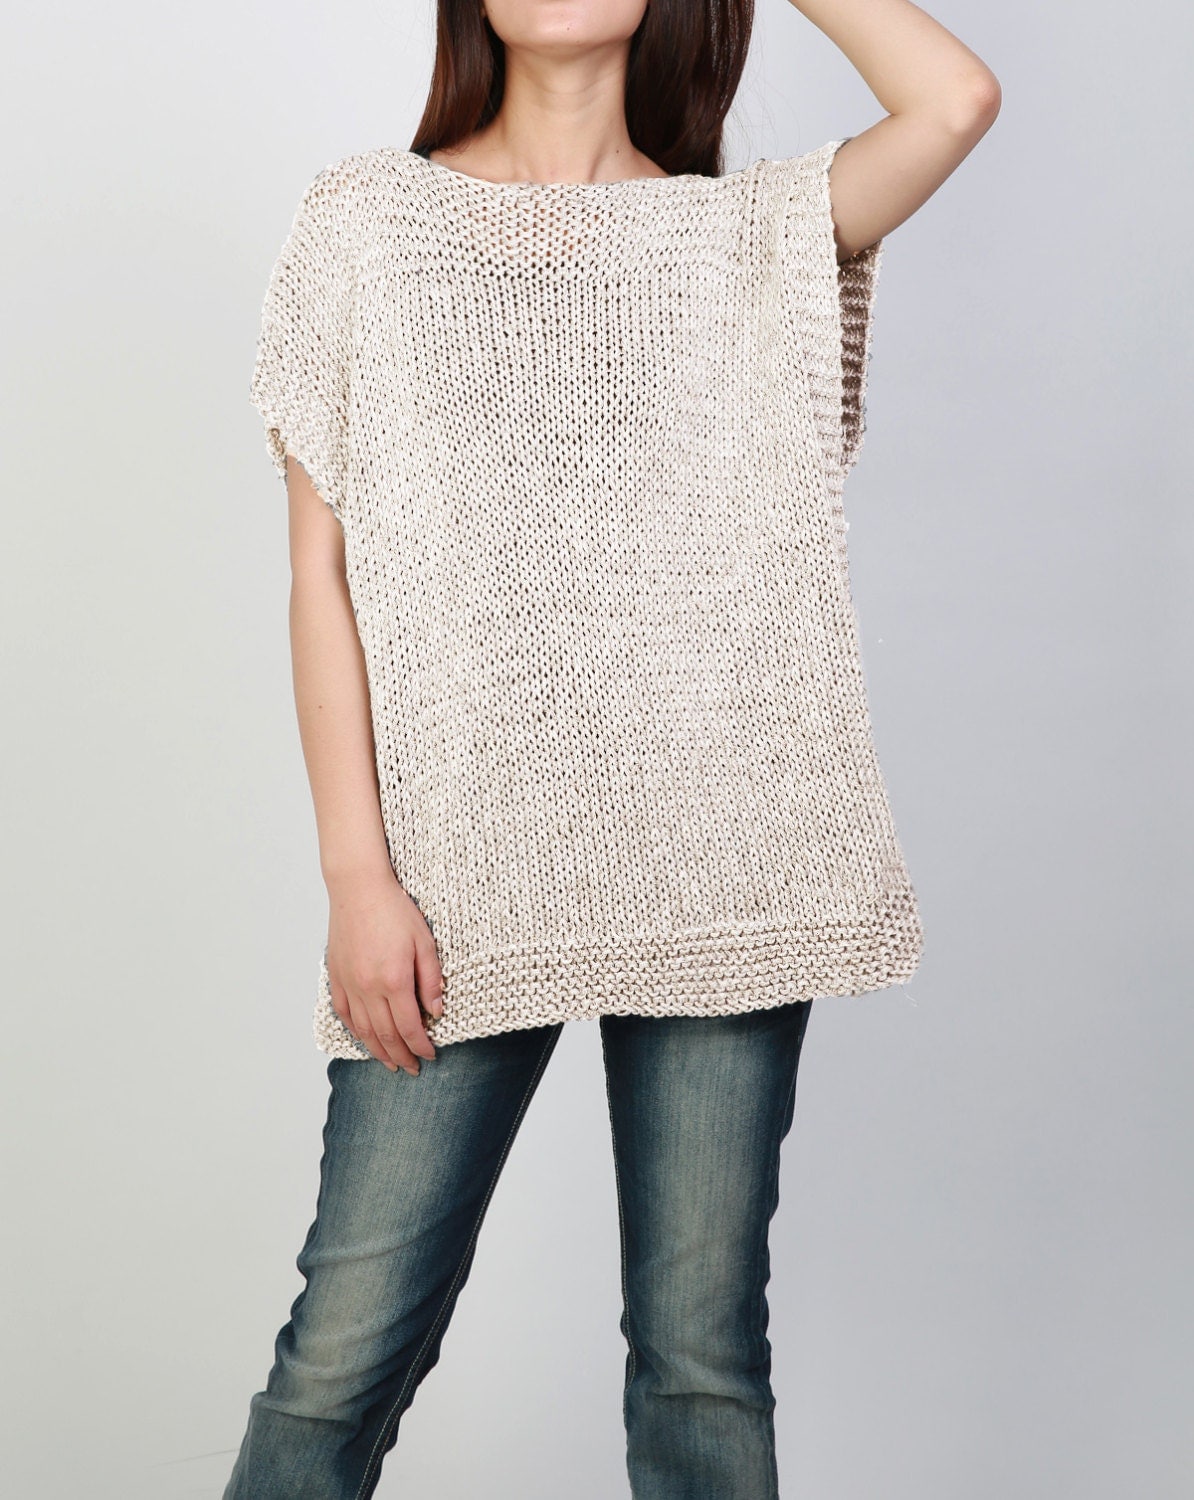 Hand knit Tunic sweater eco cotton woman sweater vest wheat top ...